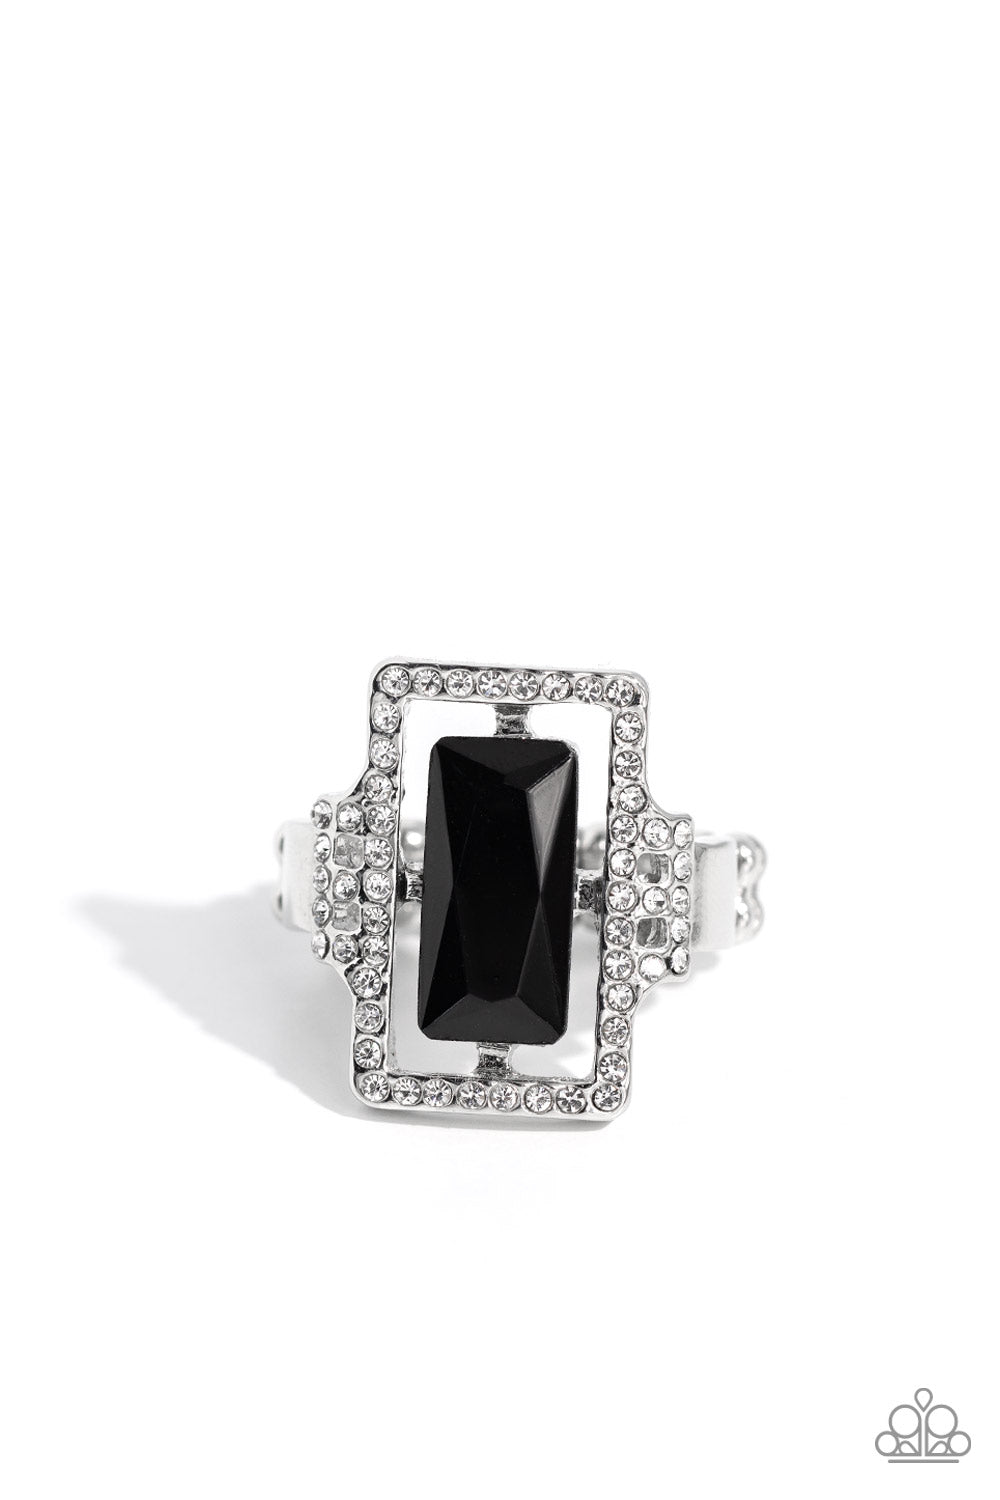 <p data-mce-fragment="1">Black Rings featuring a regal emerald-style cut, a faceted black gem is nestled and pronged inside an airy silver frame encrusted in rows of dainty glassy white rhinestones for a blinding look. Features a dainty stretchy band for a flexible fit.</p> <p data-mce-fragment="1"><i data-mce-fragment="1">Sold as one individual ring.</i></p>